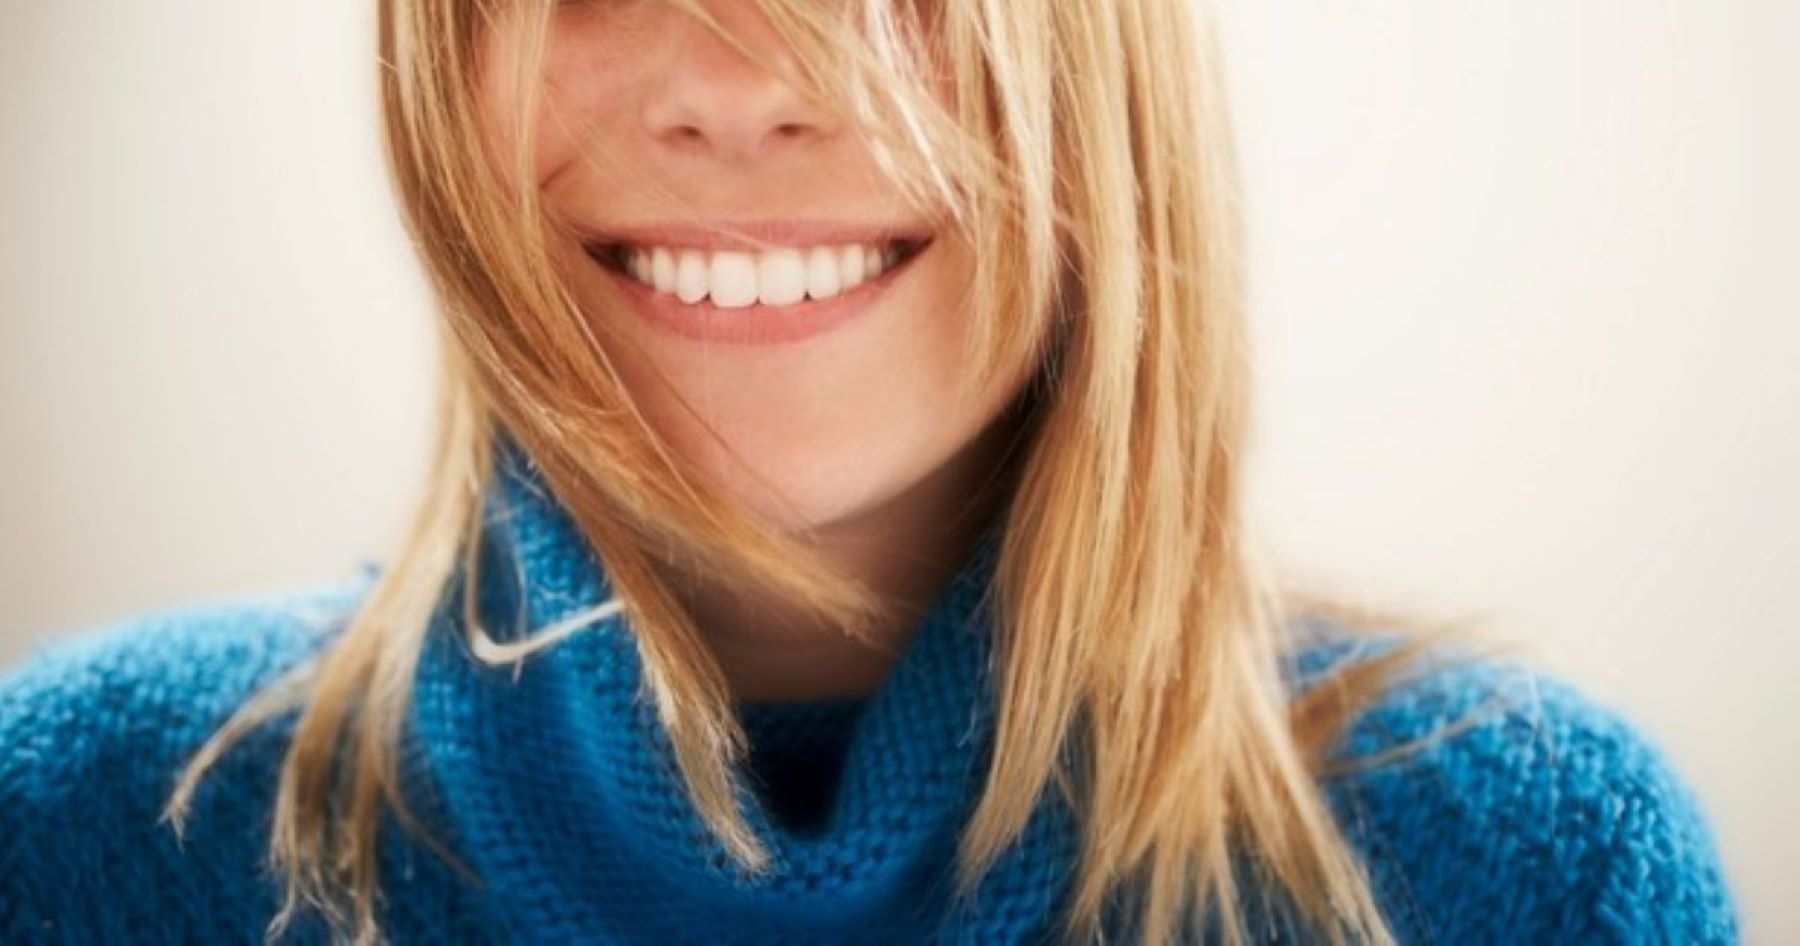 woman with blonde hair smiling in blue sweater